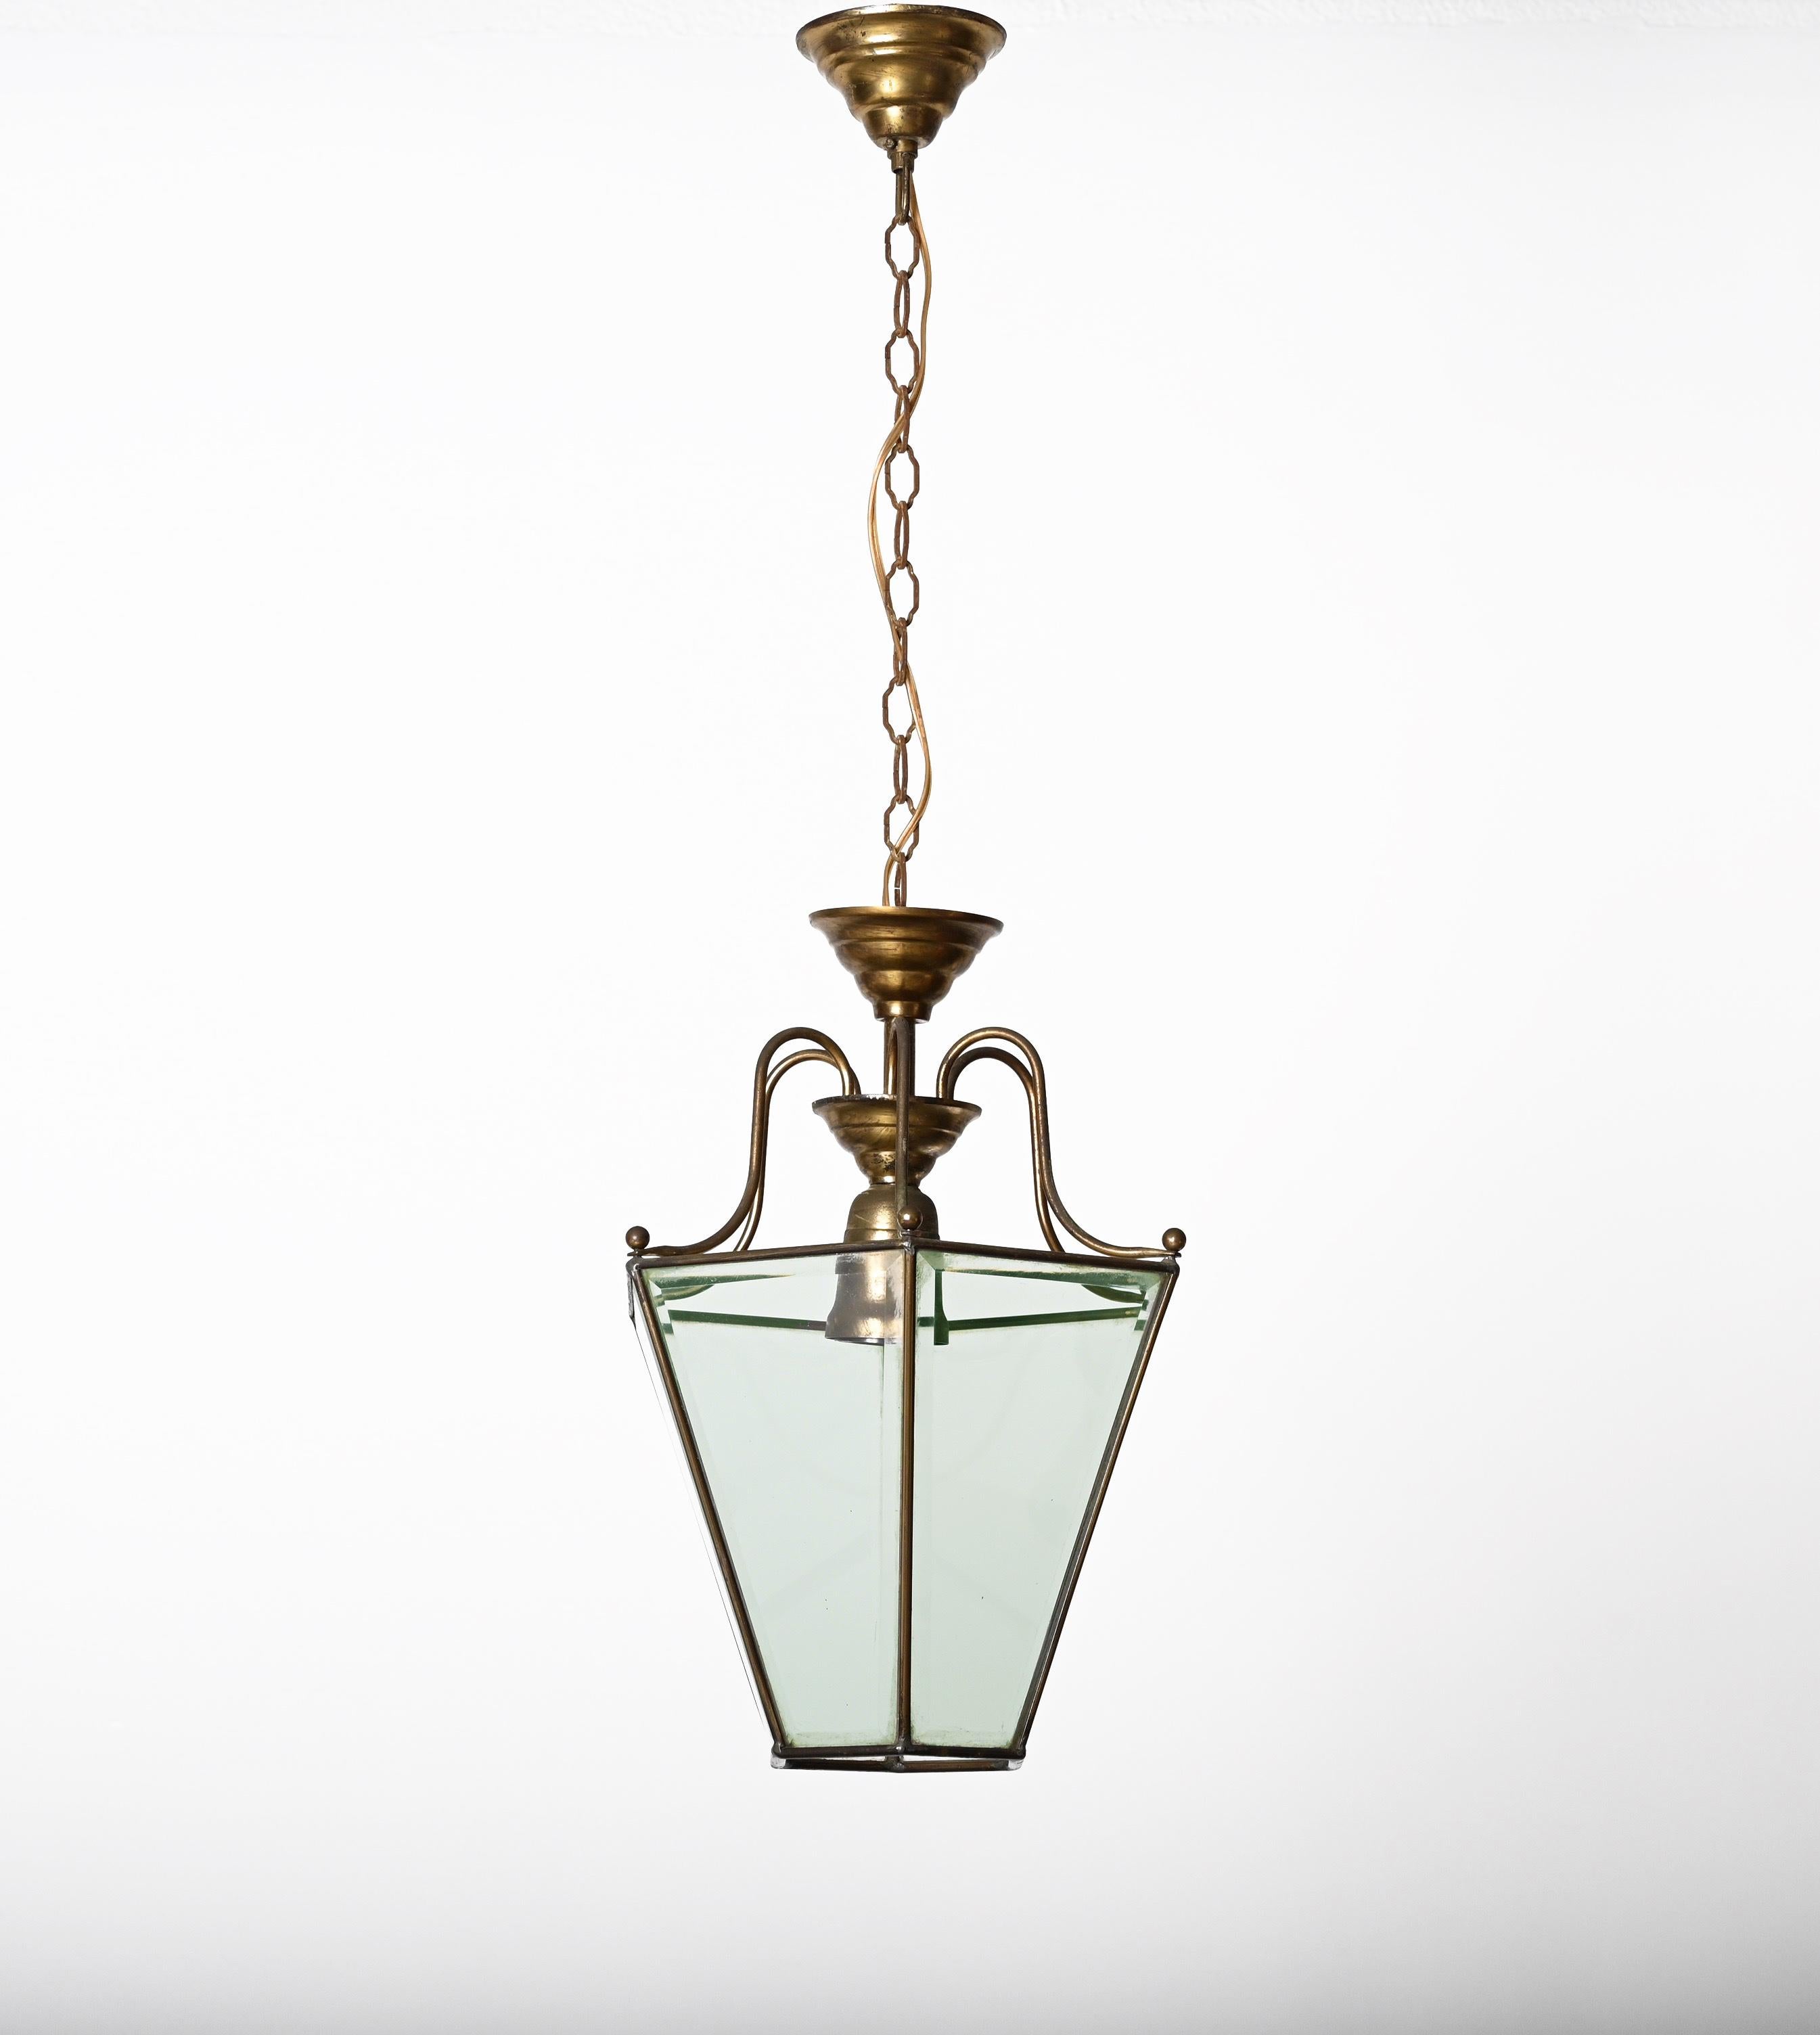 Superb brass and bevelled glass hexagonal chandelier. This amazing pendant light was designed in Italy and inspired by the work of Adolf Loos during the 1950s.

This piece is fantastic thanks to a splendid and clear suspension showing six faceted